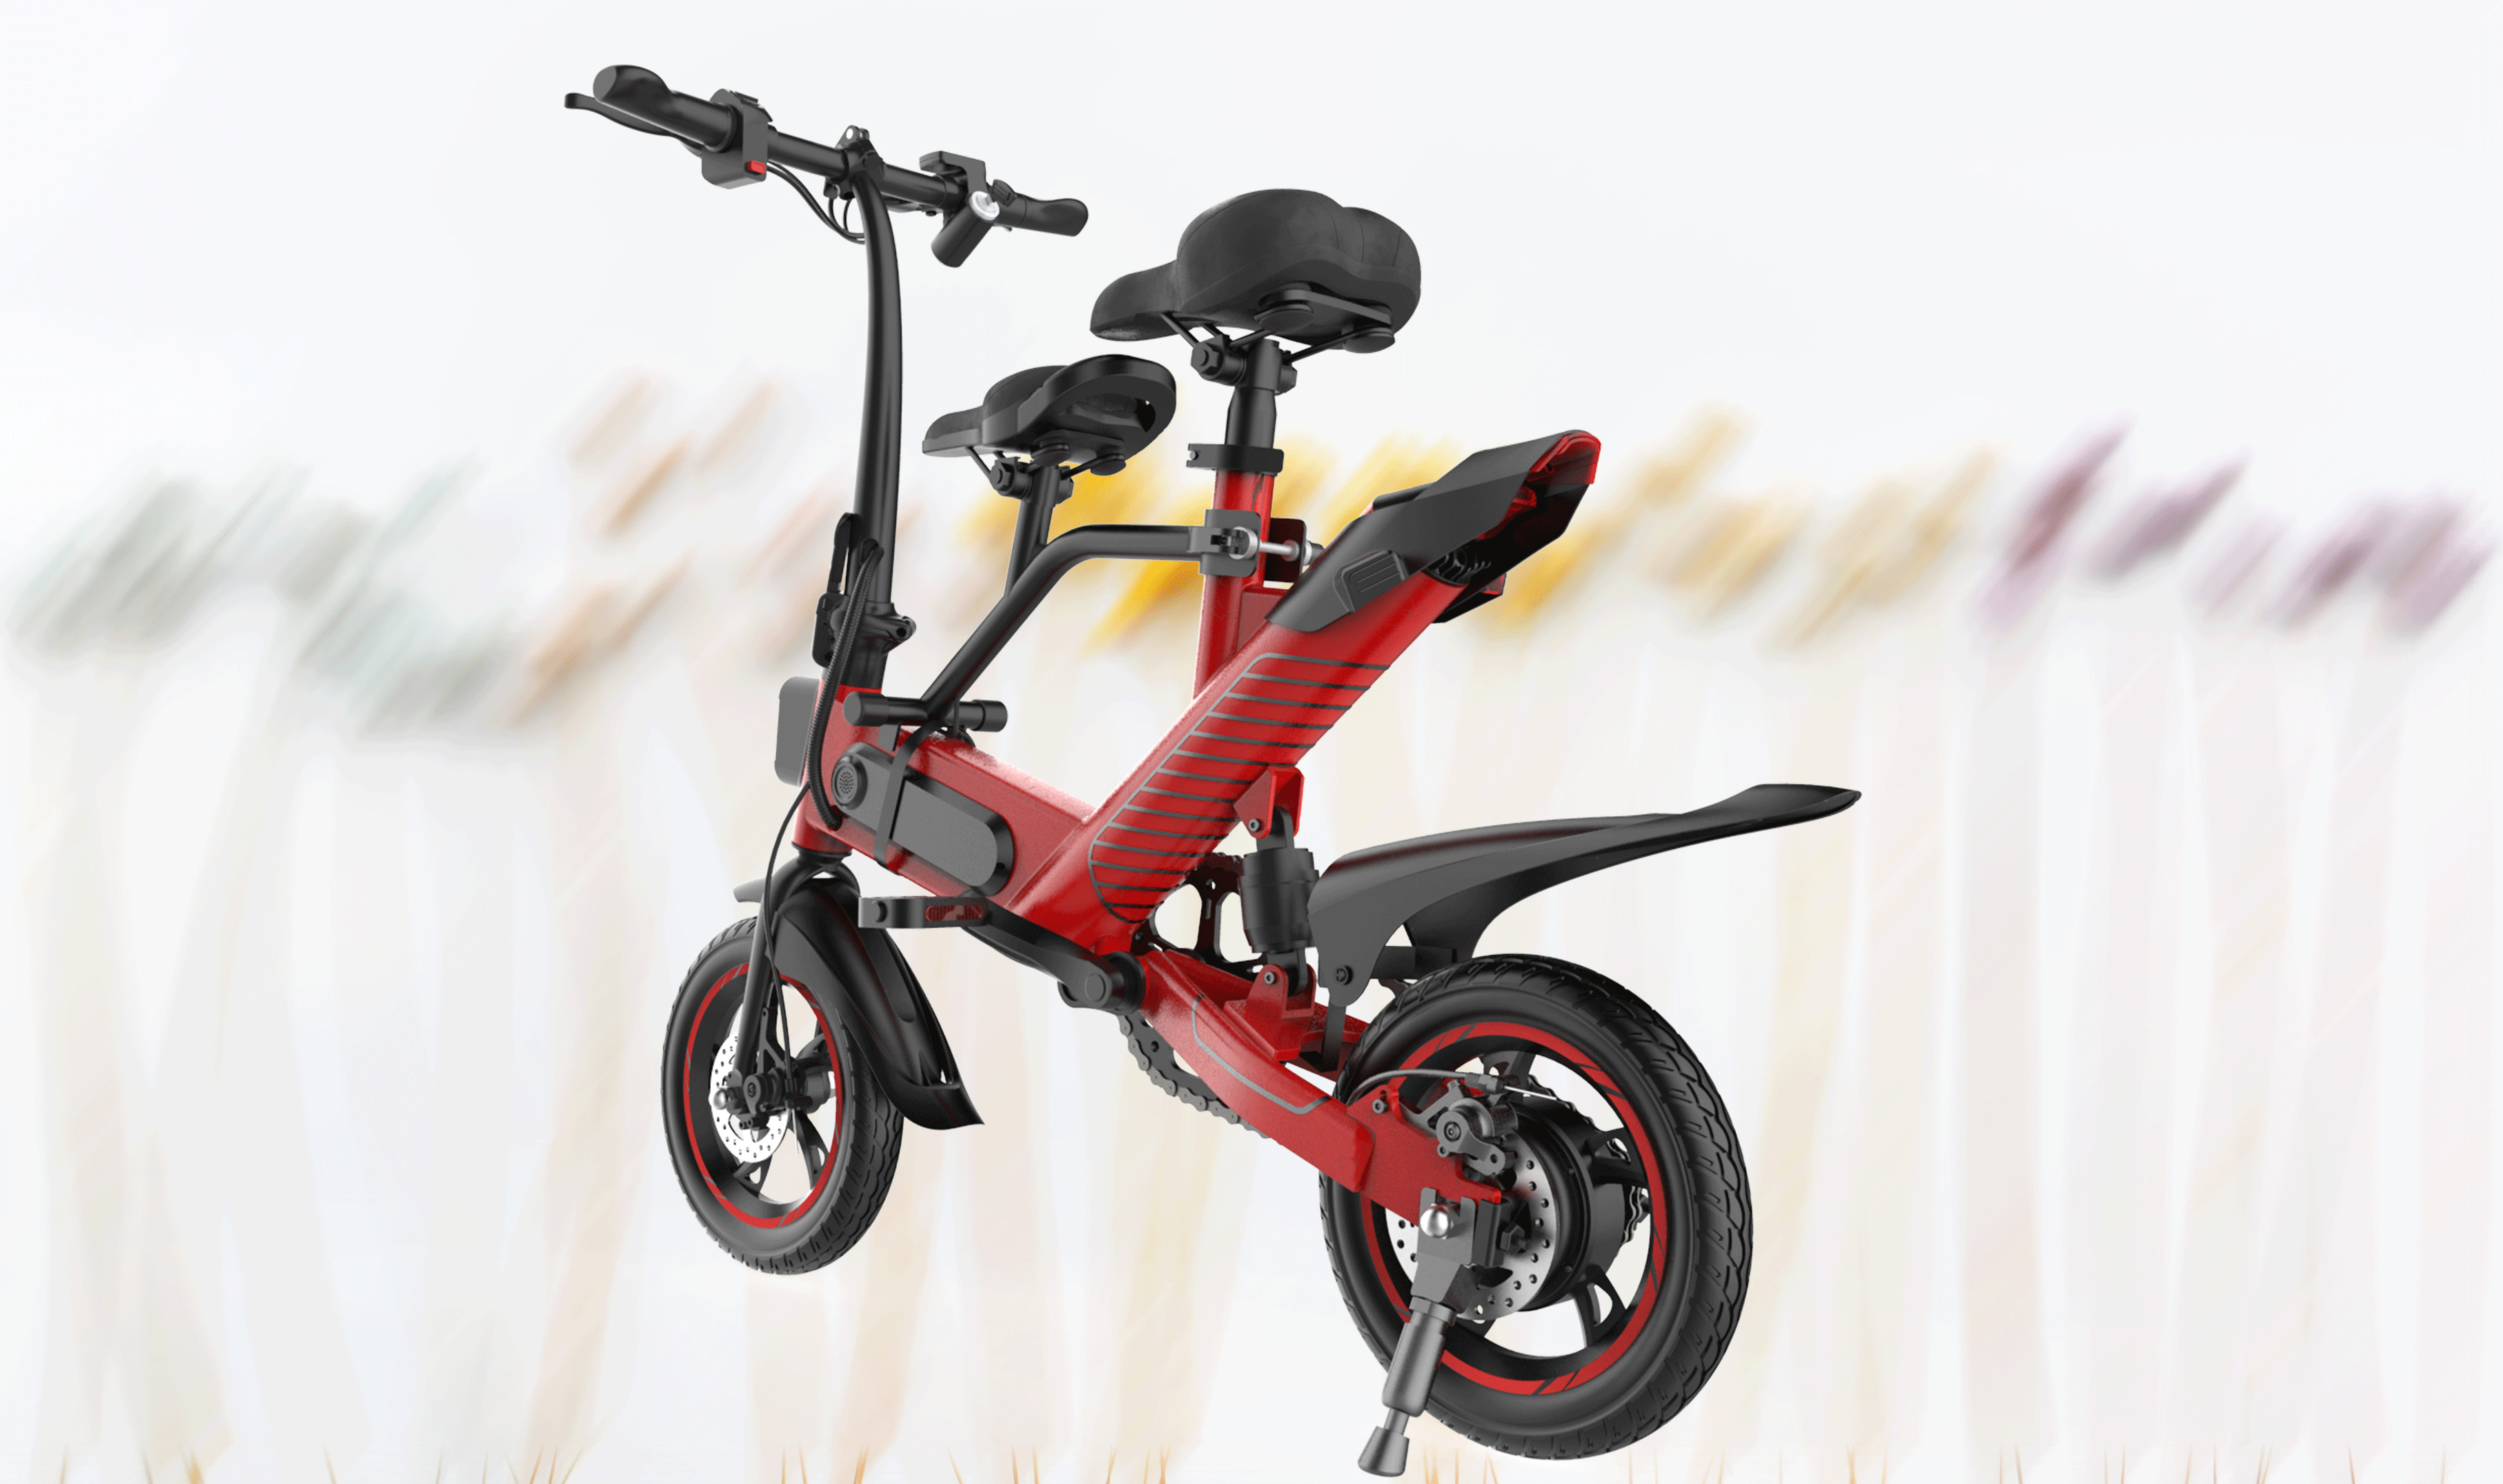  Family Folding Travel Bike 15 Degrees Climbing Ability Short Charging Time Manufactures